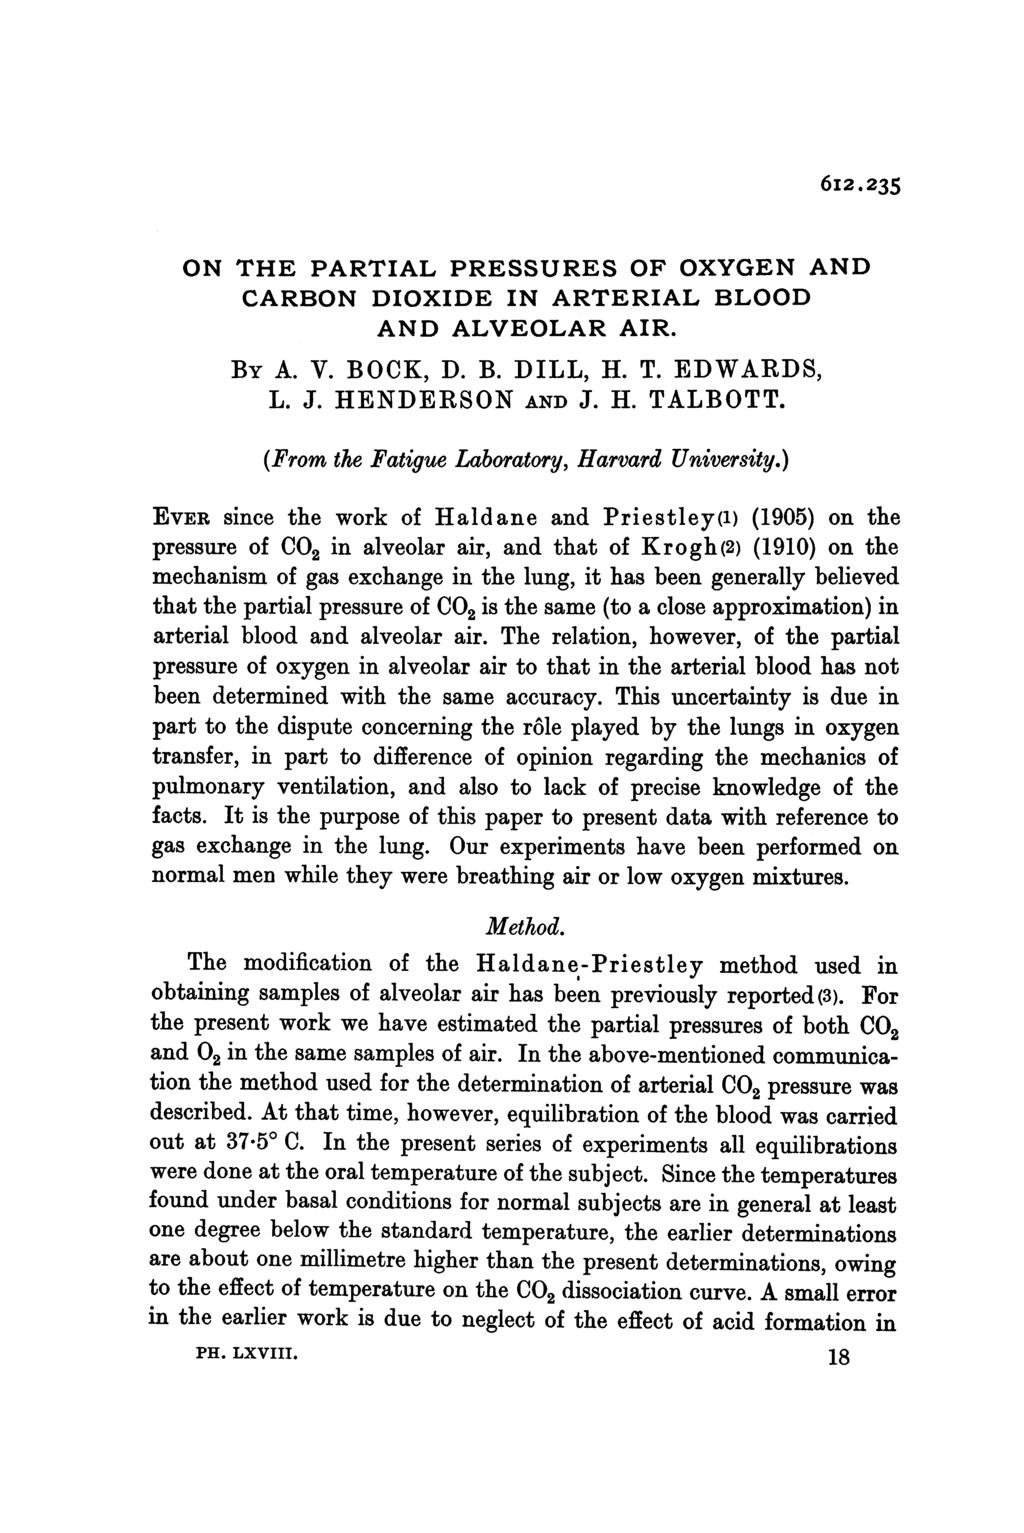 6I2.235 ON THE PARTIAL PRESSURES OF OXYGEN AND CARBON DIOXIDE IN ARTERIAL BLOOD AND ALVEOLAR AIR. By A. V. BOCK, D. B. DILL, H. T. EDWARDS, L. J. HENDERSON AND J. H. TALBOTT.